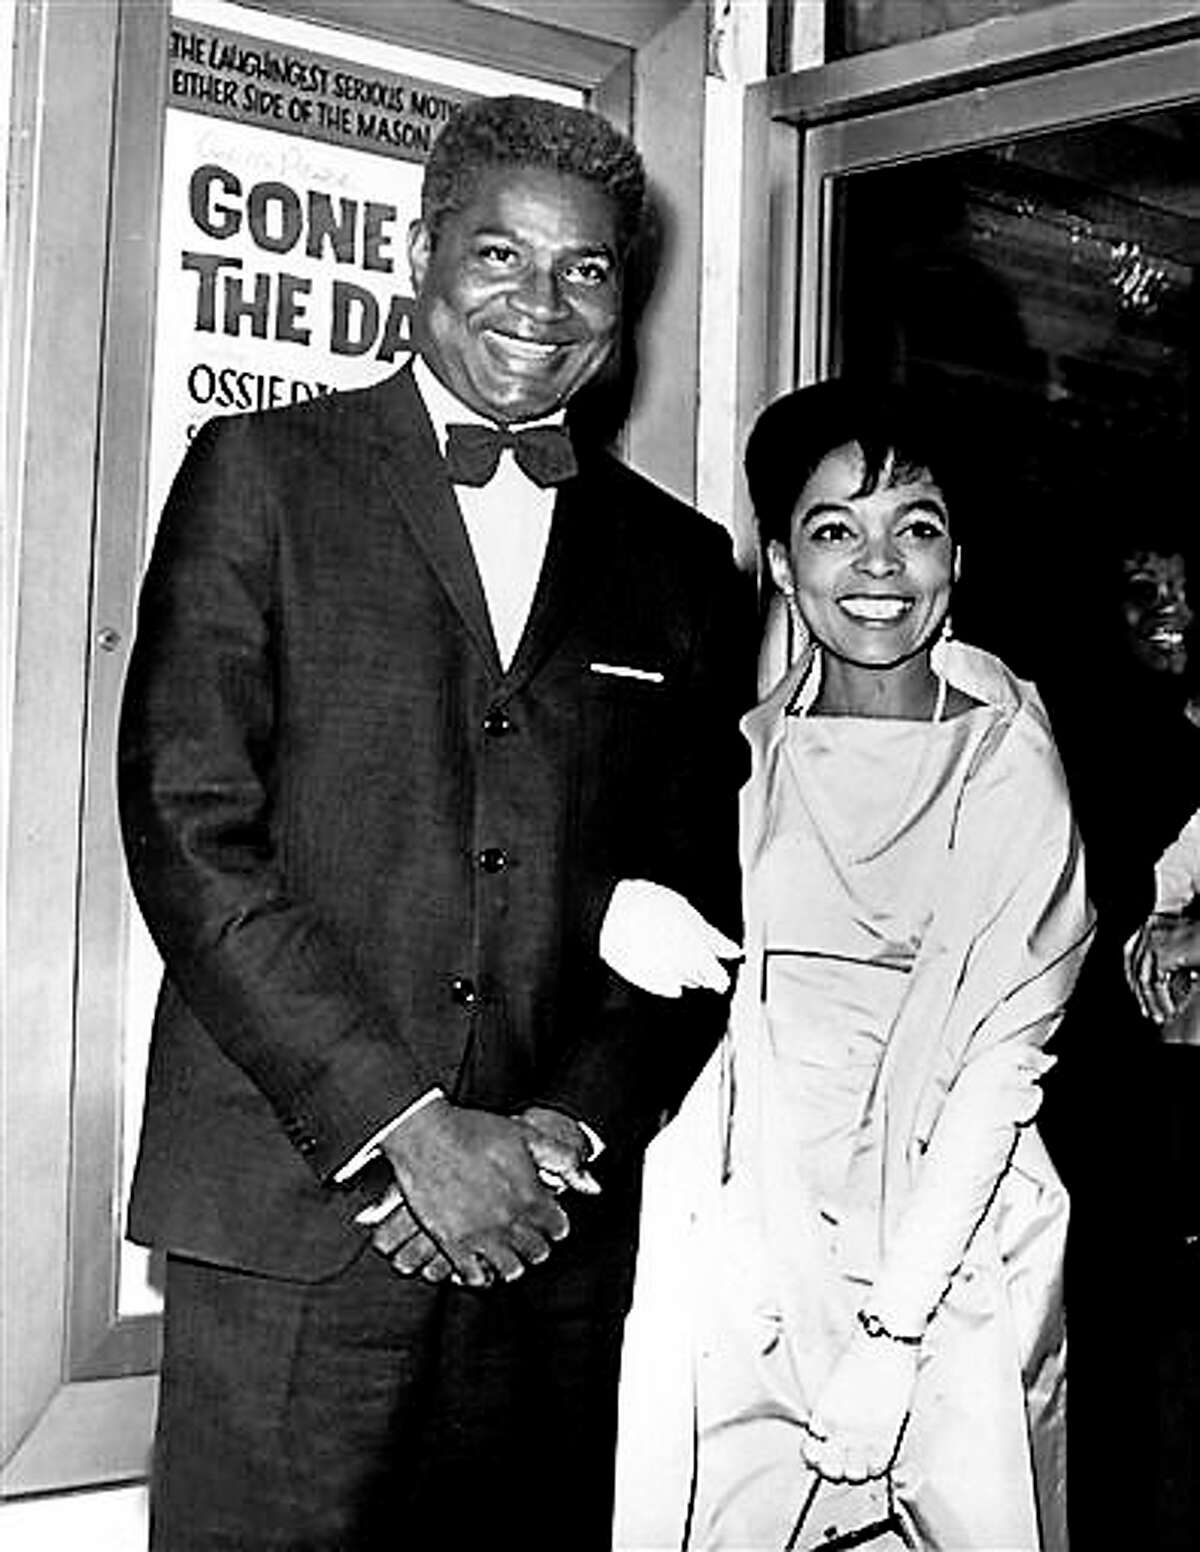 In this Sept. 23, 1963, file photo, actors Ossie Davis, left, and Ruby Dee pose in front of the movie poster at the opening night gala of their film “Gone Are the Days!” based on Davis’ play “Purlie Victorious,” at the Trans-Lux East Theater in New York City. Dee, an acclaimed actor and civil rights activist whose versatile career spanned stage, radio television and film, has died at age 91, according to her daughter. Nora Davis Day told The Associated Press on Thursday, June 11, 2014, that her mother died at home at New Rochelle, New York, on Wednesday night.